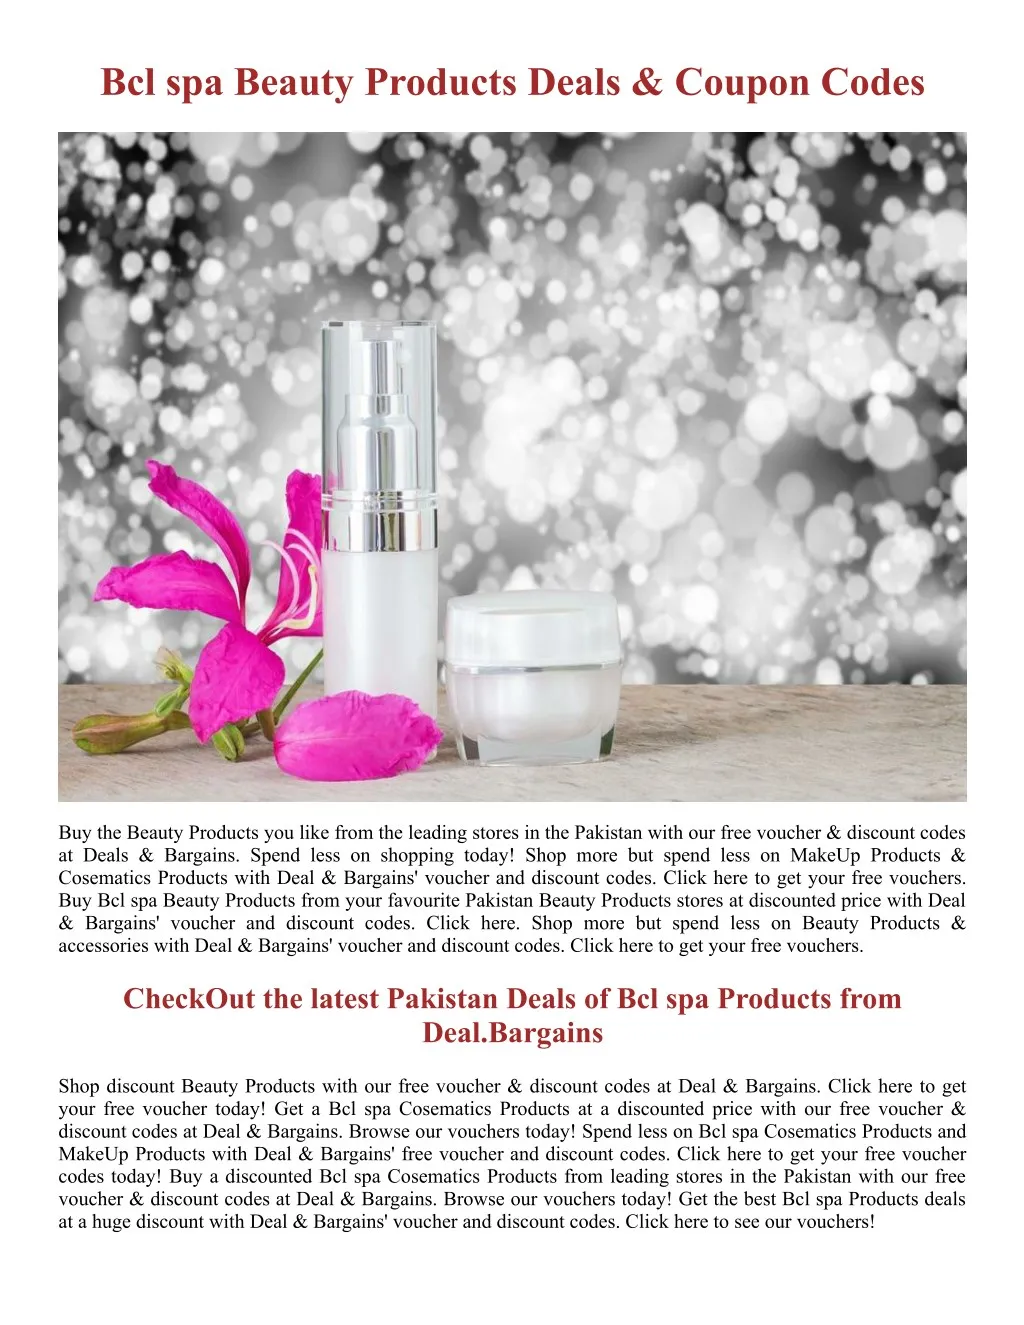 bcl spa beauty products deals coupon codes n.